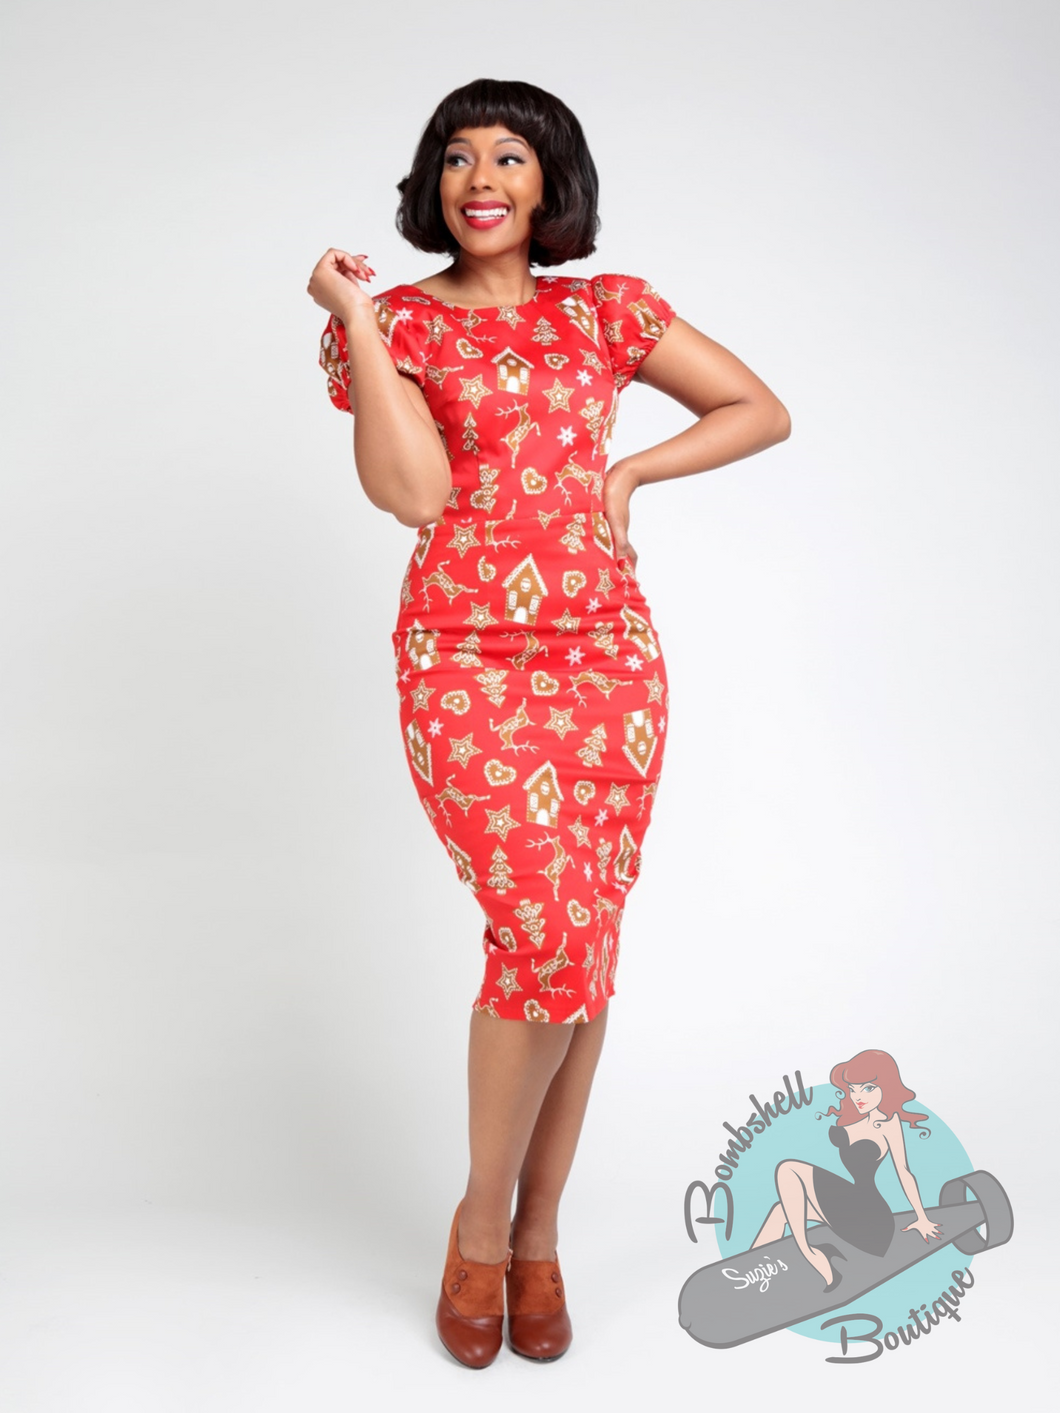 Red pencil dress with print of gingerbread cookies. This is a cute Christmas wiggle dress - a perfect holiday dress for a 1950's pin up look.